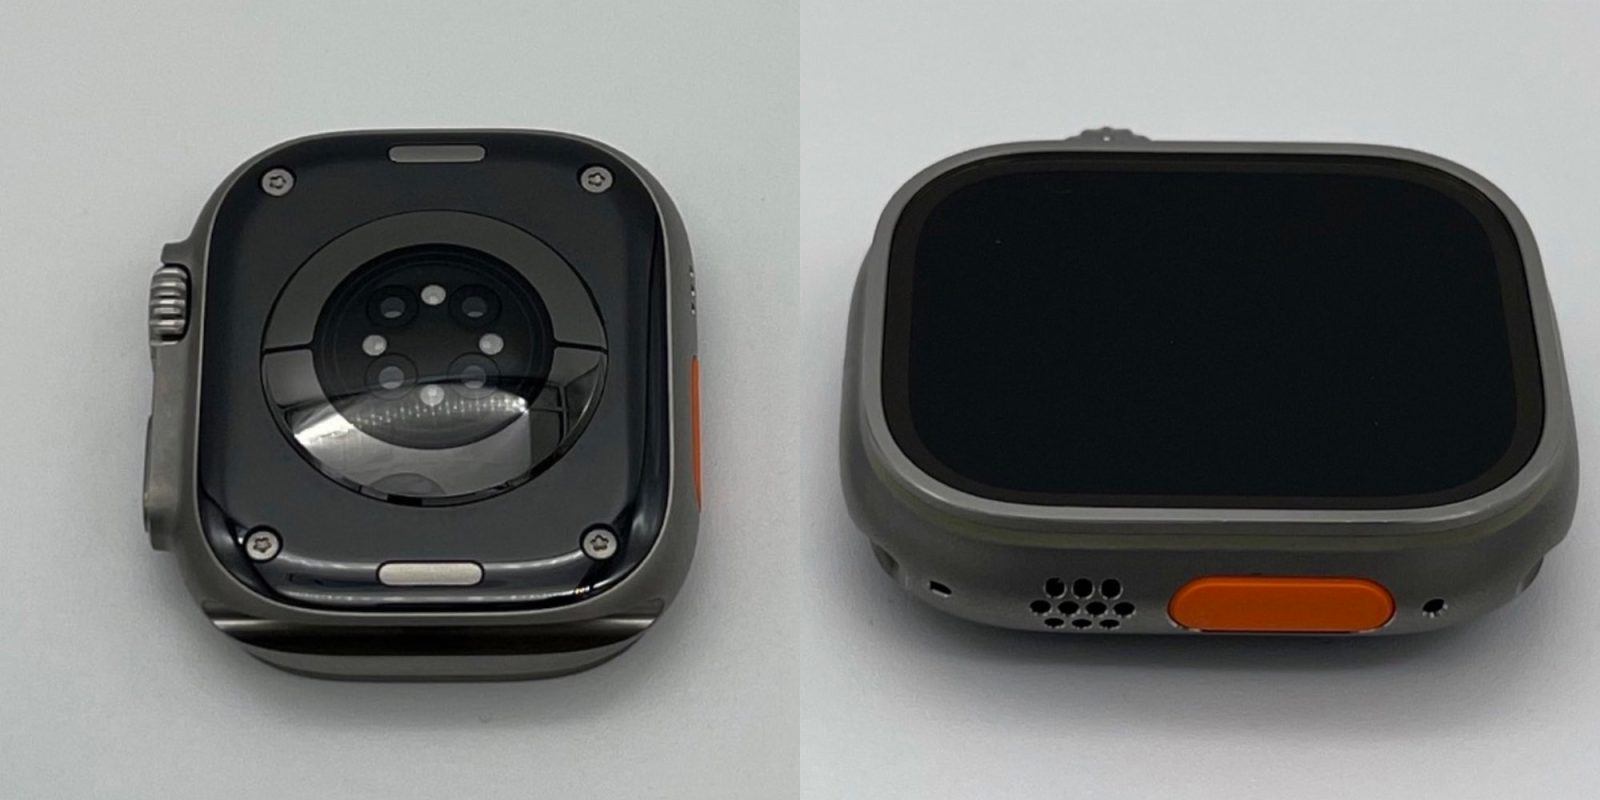 FCC images show Apple Watch Ultra prototype with black ceramic back